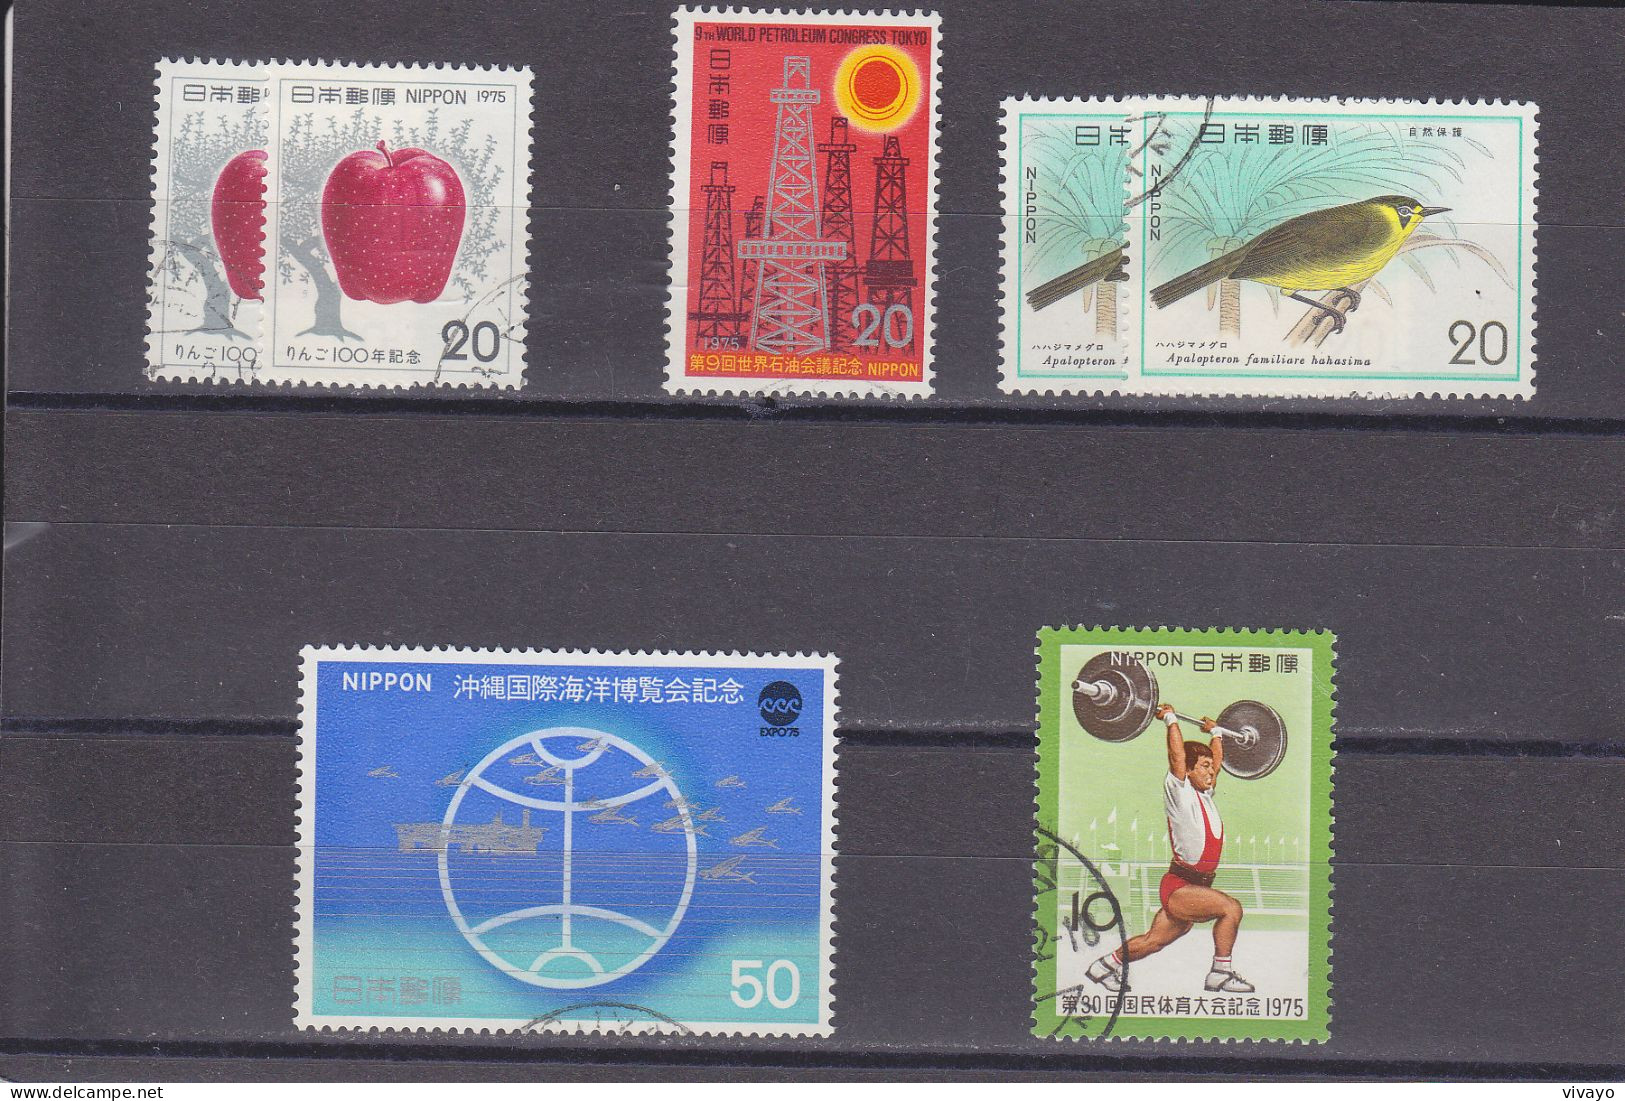 JAPAN - JAPON - O / FINE CANCELLED - 1975 - APPLE, PETROL CONFERENCE, EXPO, BIRD, SPORT - Used Stamps